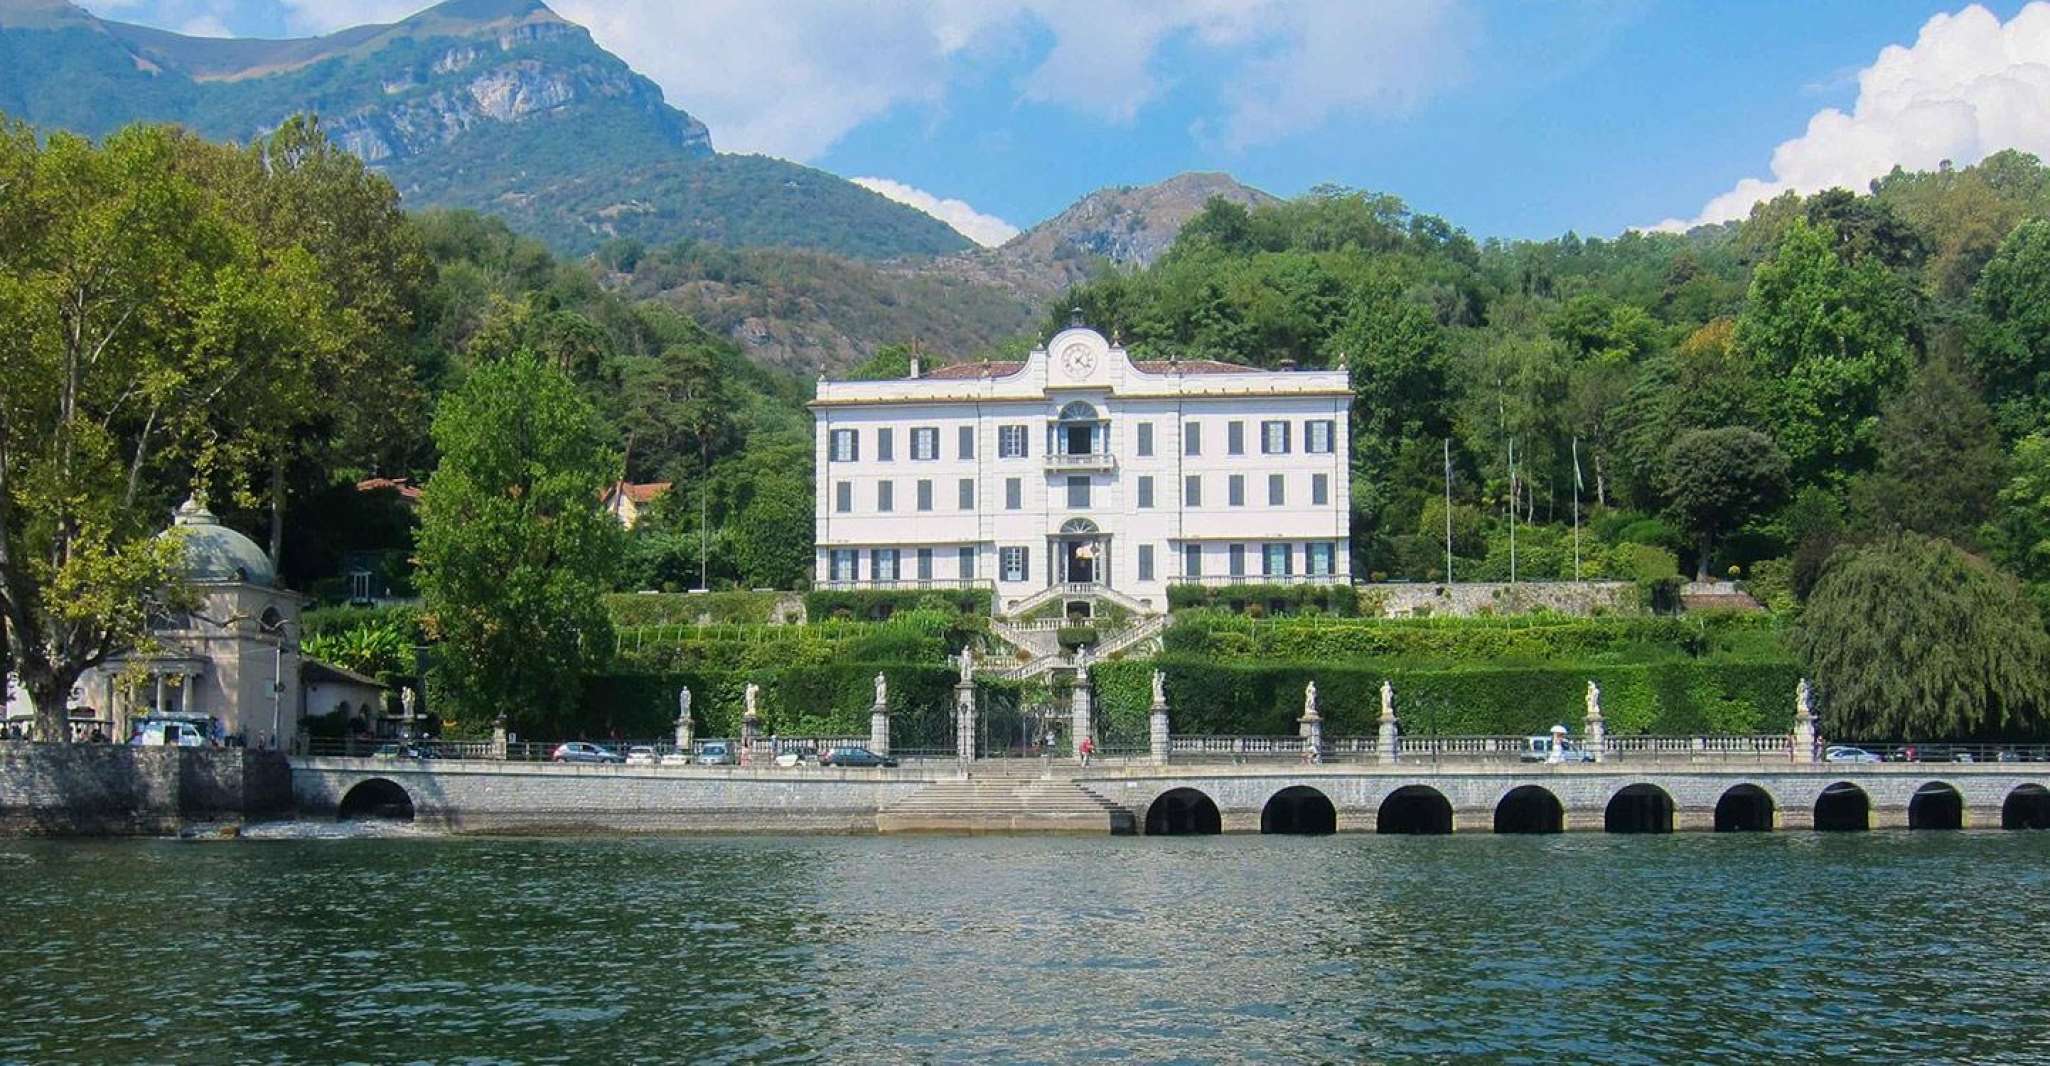 50-minute Shared Boat Tour from Varenna - Housity